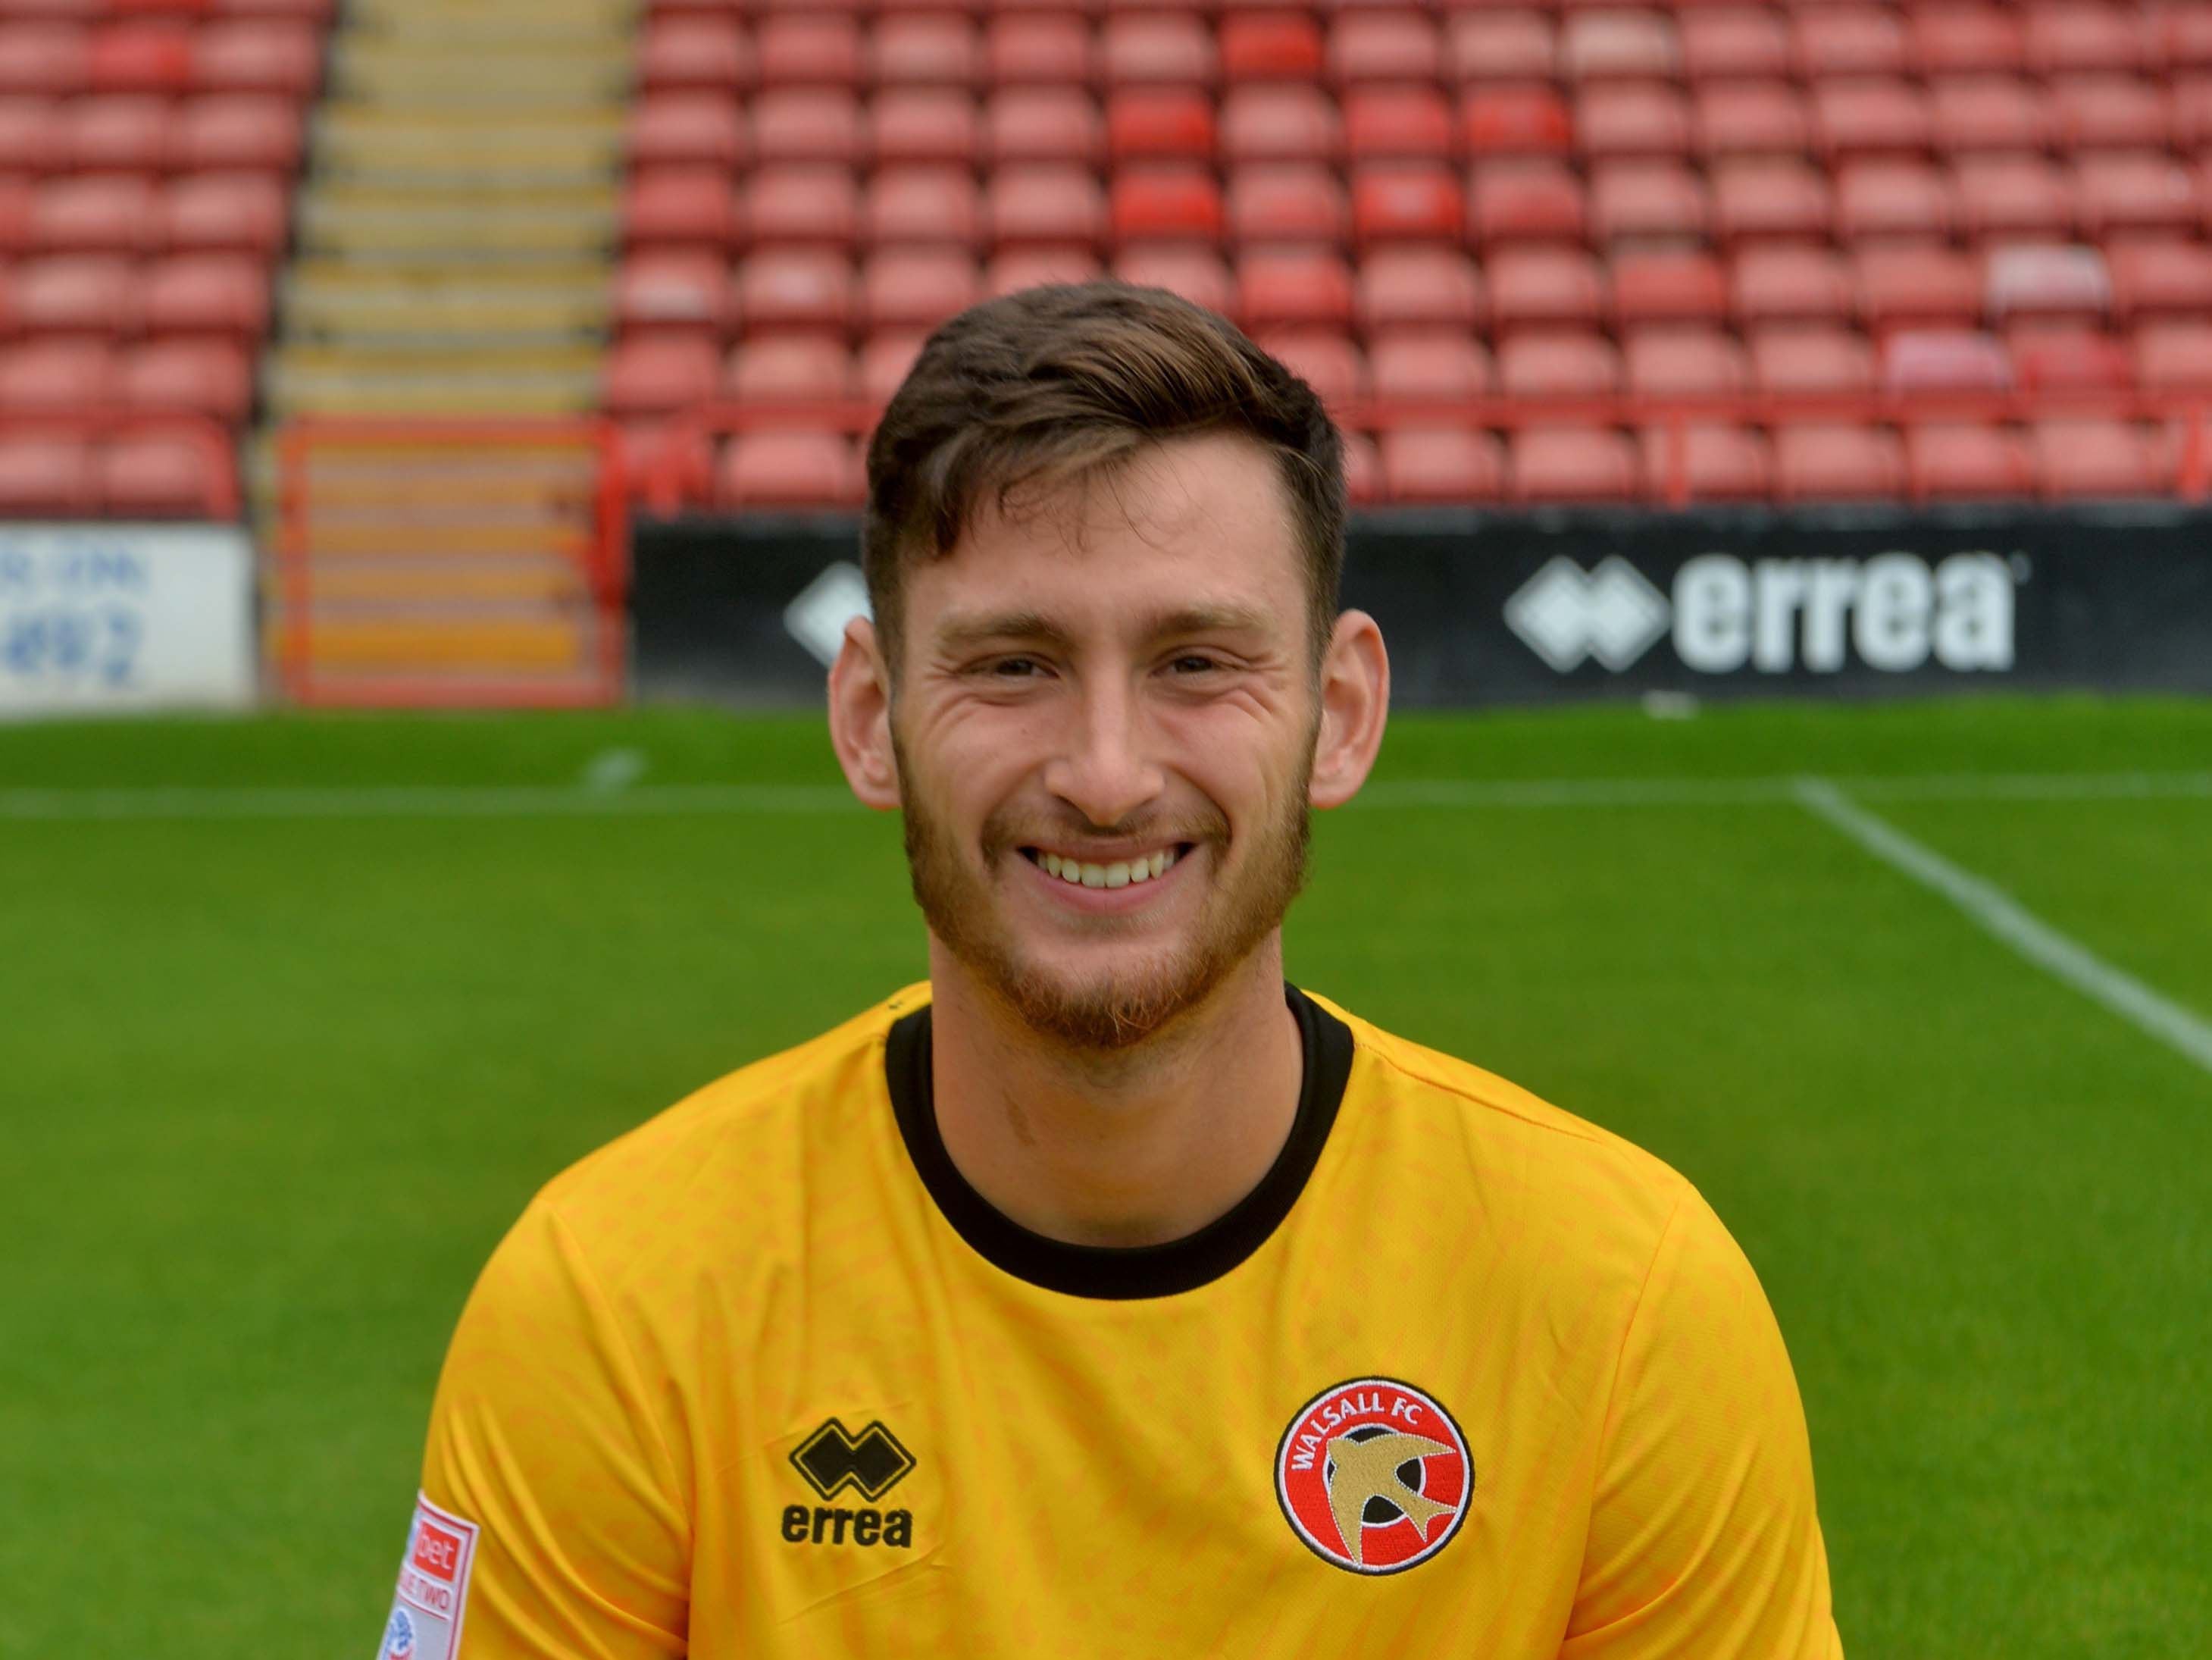 Jackson Smith joins new club after Walsall exit